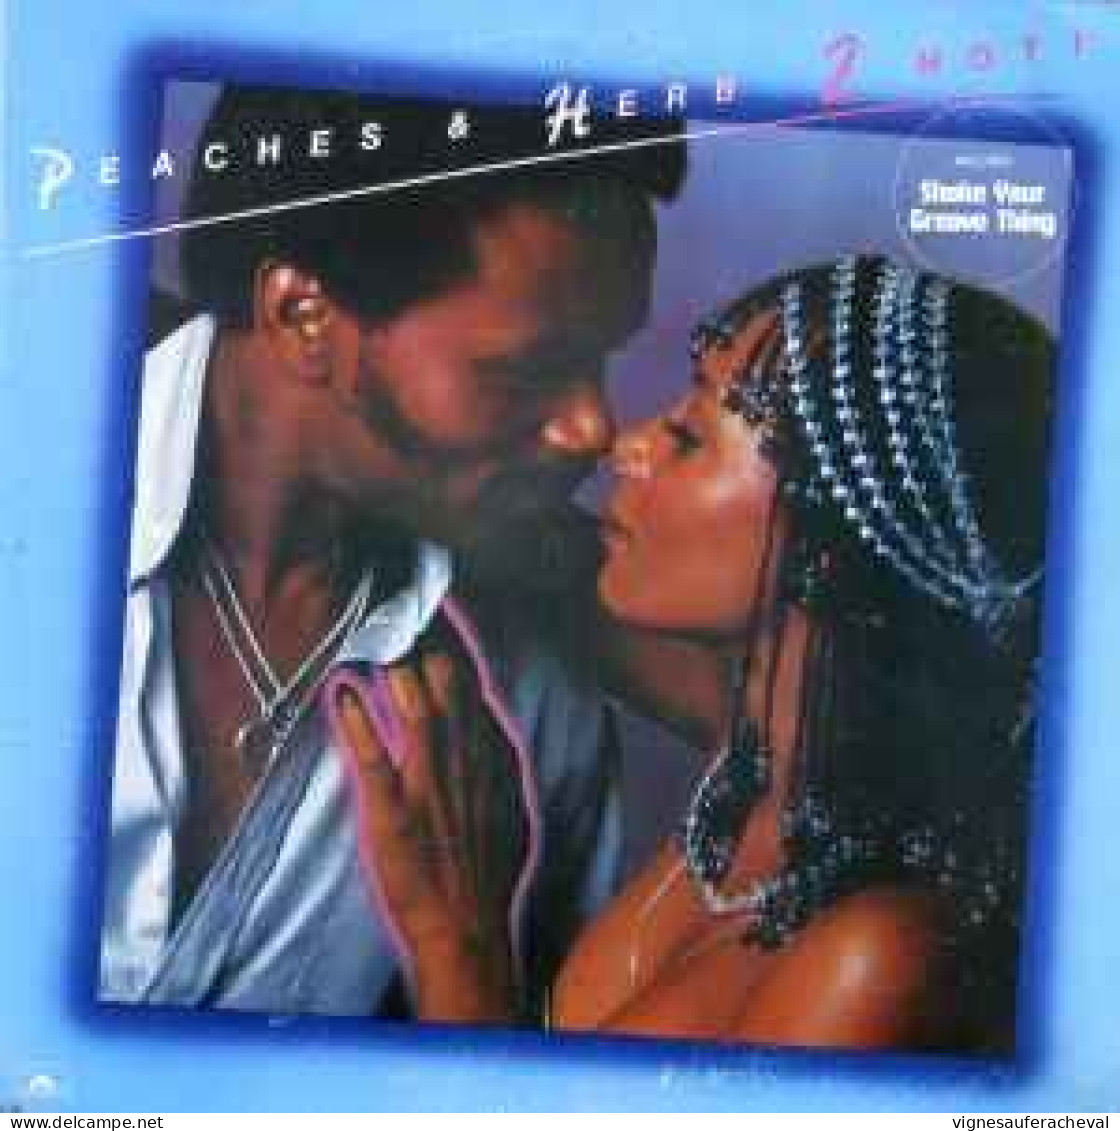 Peaches & Herb - 2 Hot - Other - English Music